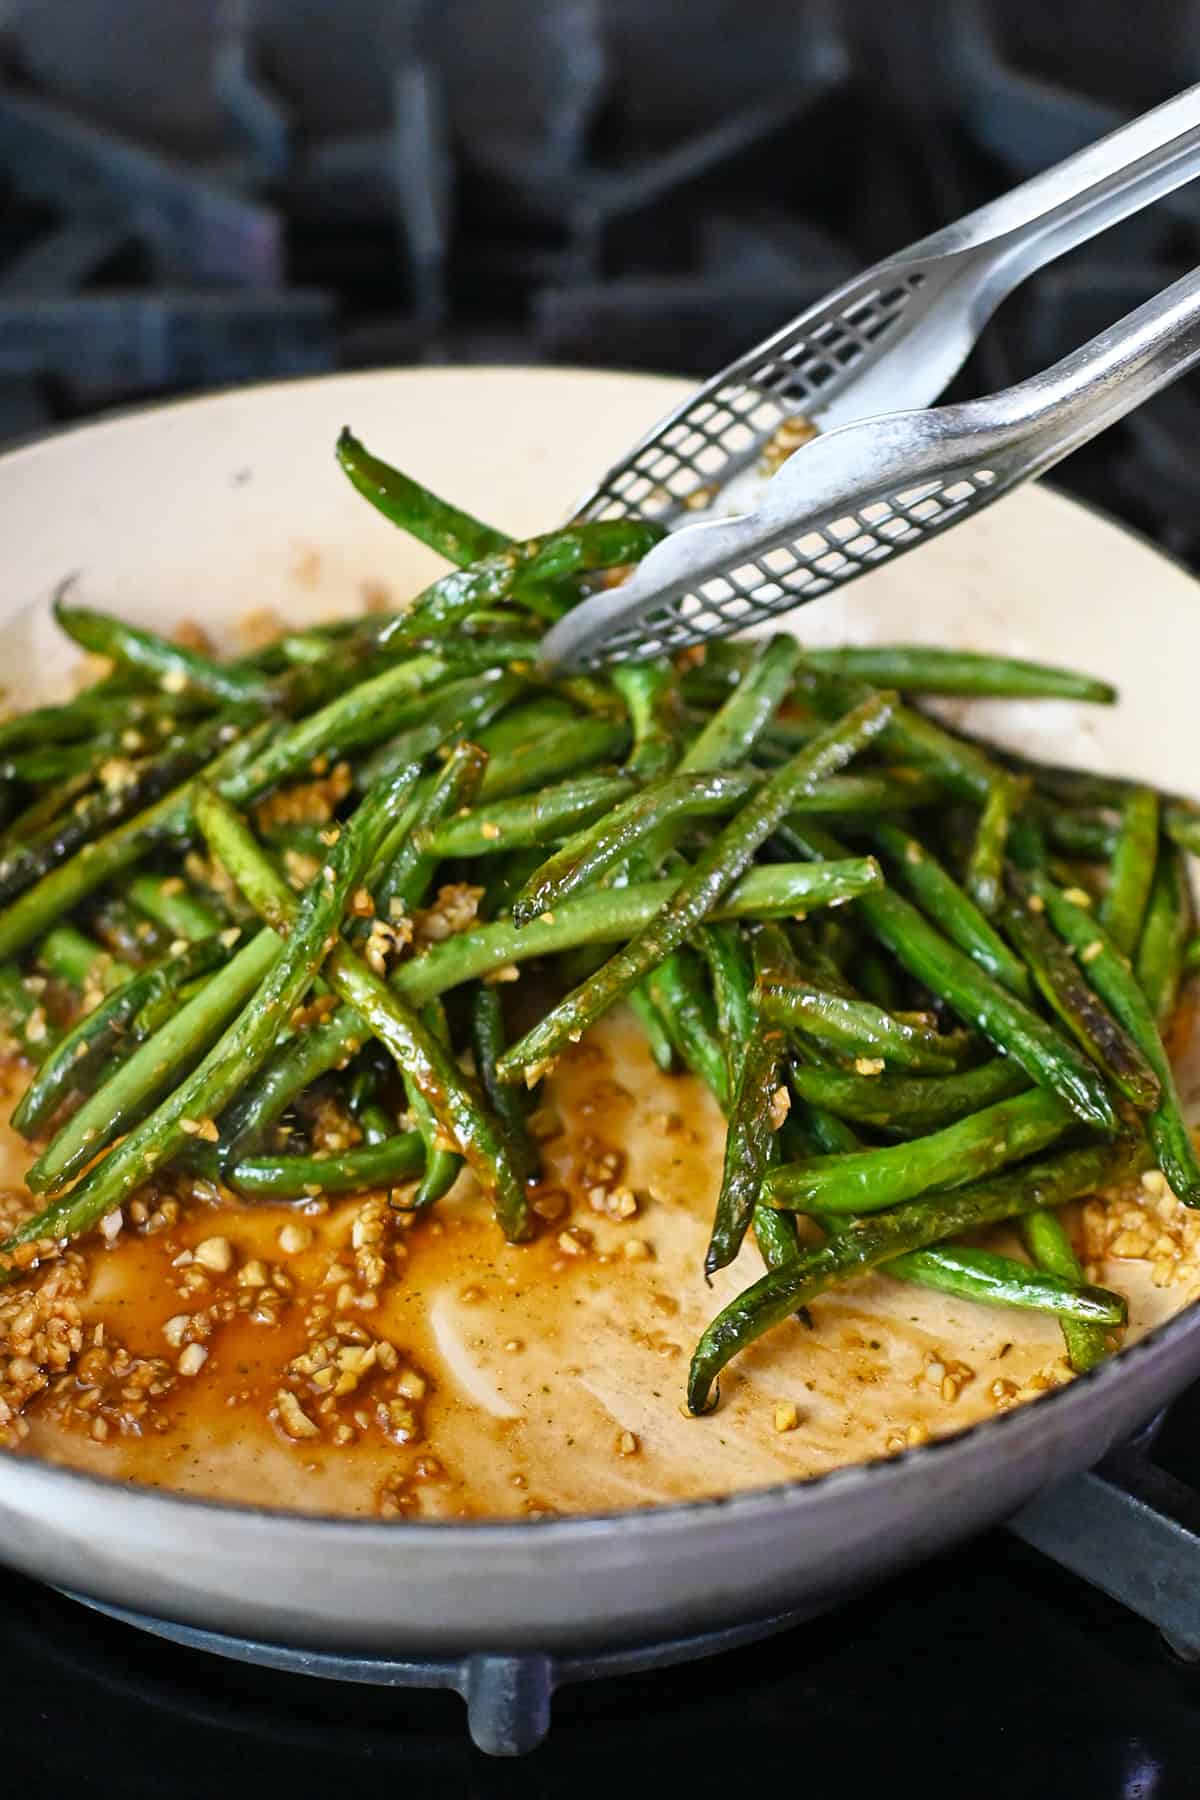 Tossing blistered green beans in a pan with a Chinese garlic sauce.